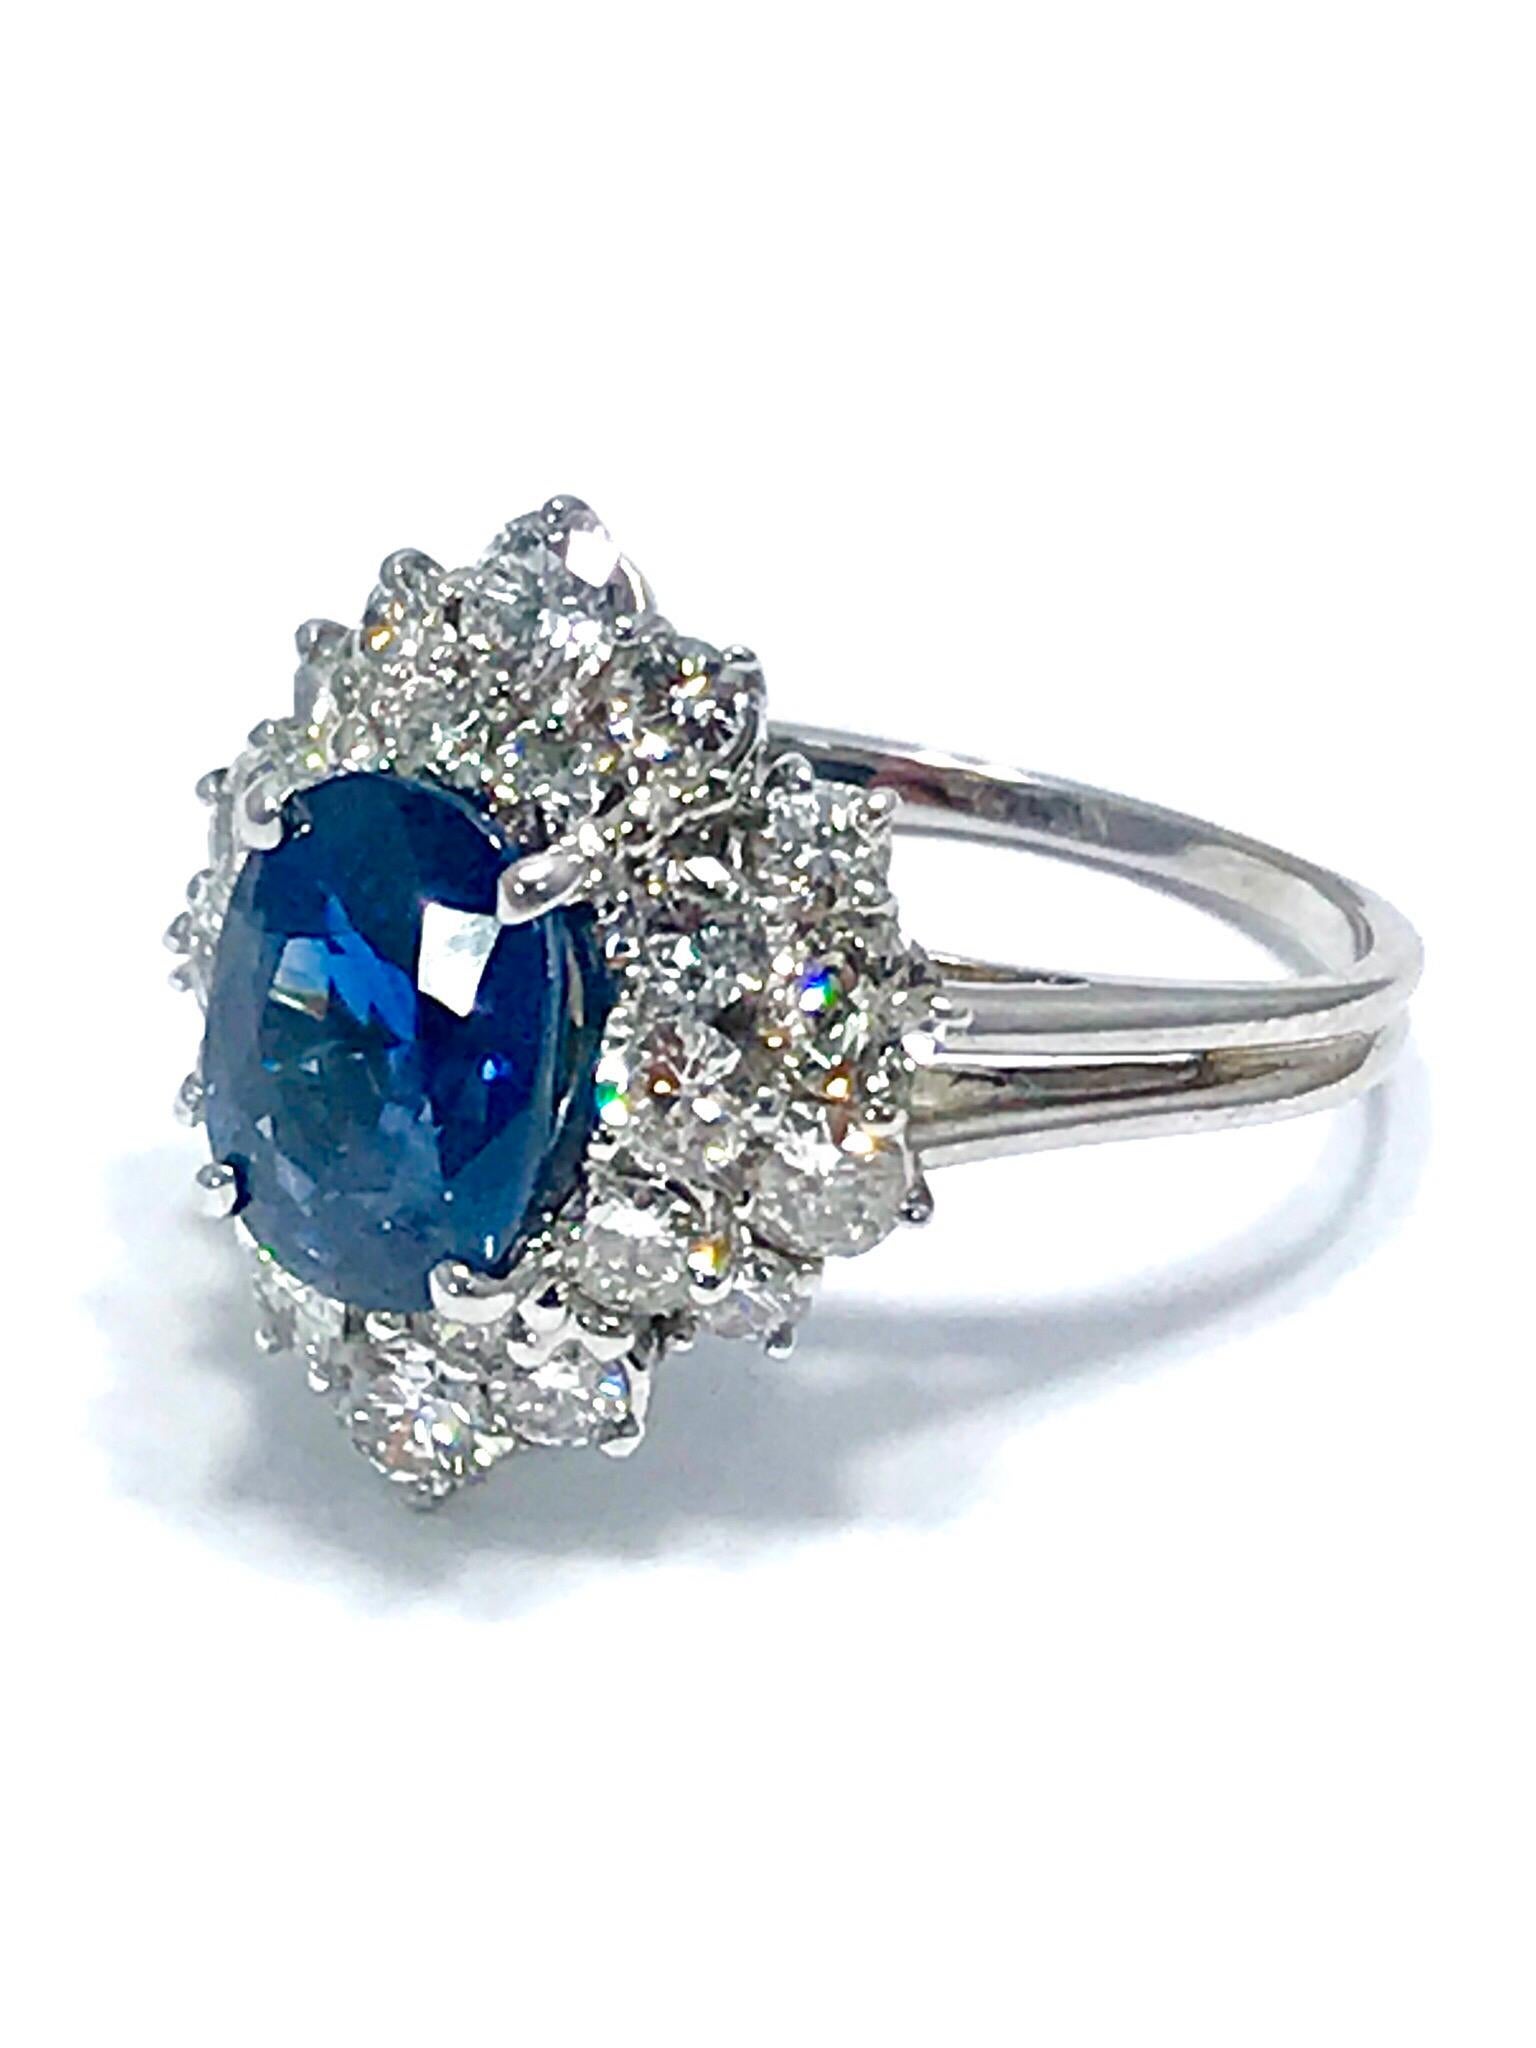 Oval Cut 3.12 Carat Oval Sapphire and Diamond White Gold Ring